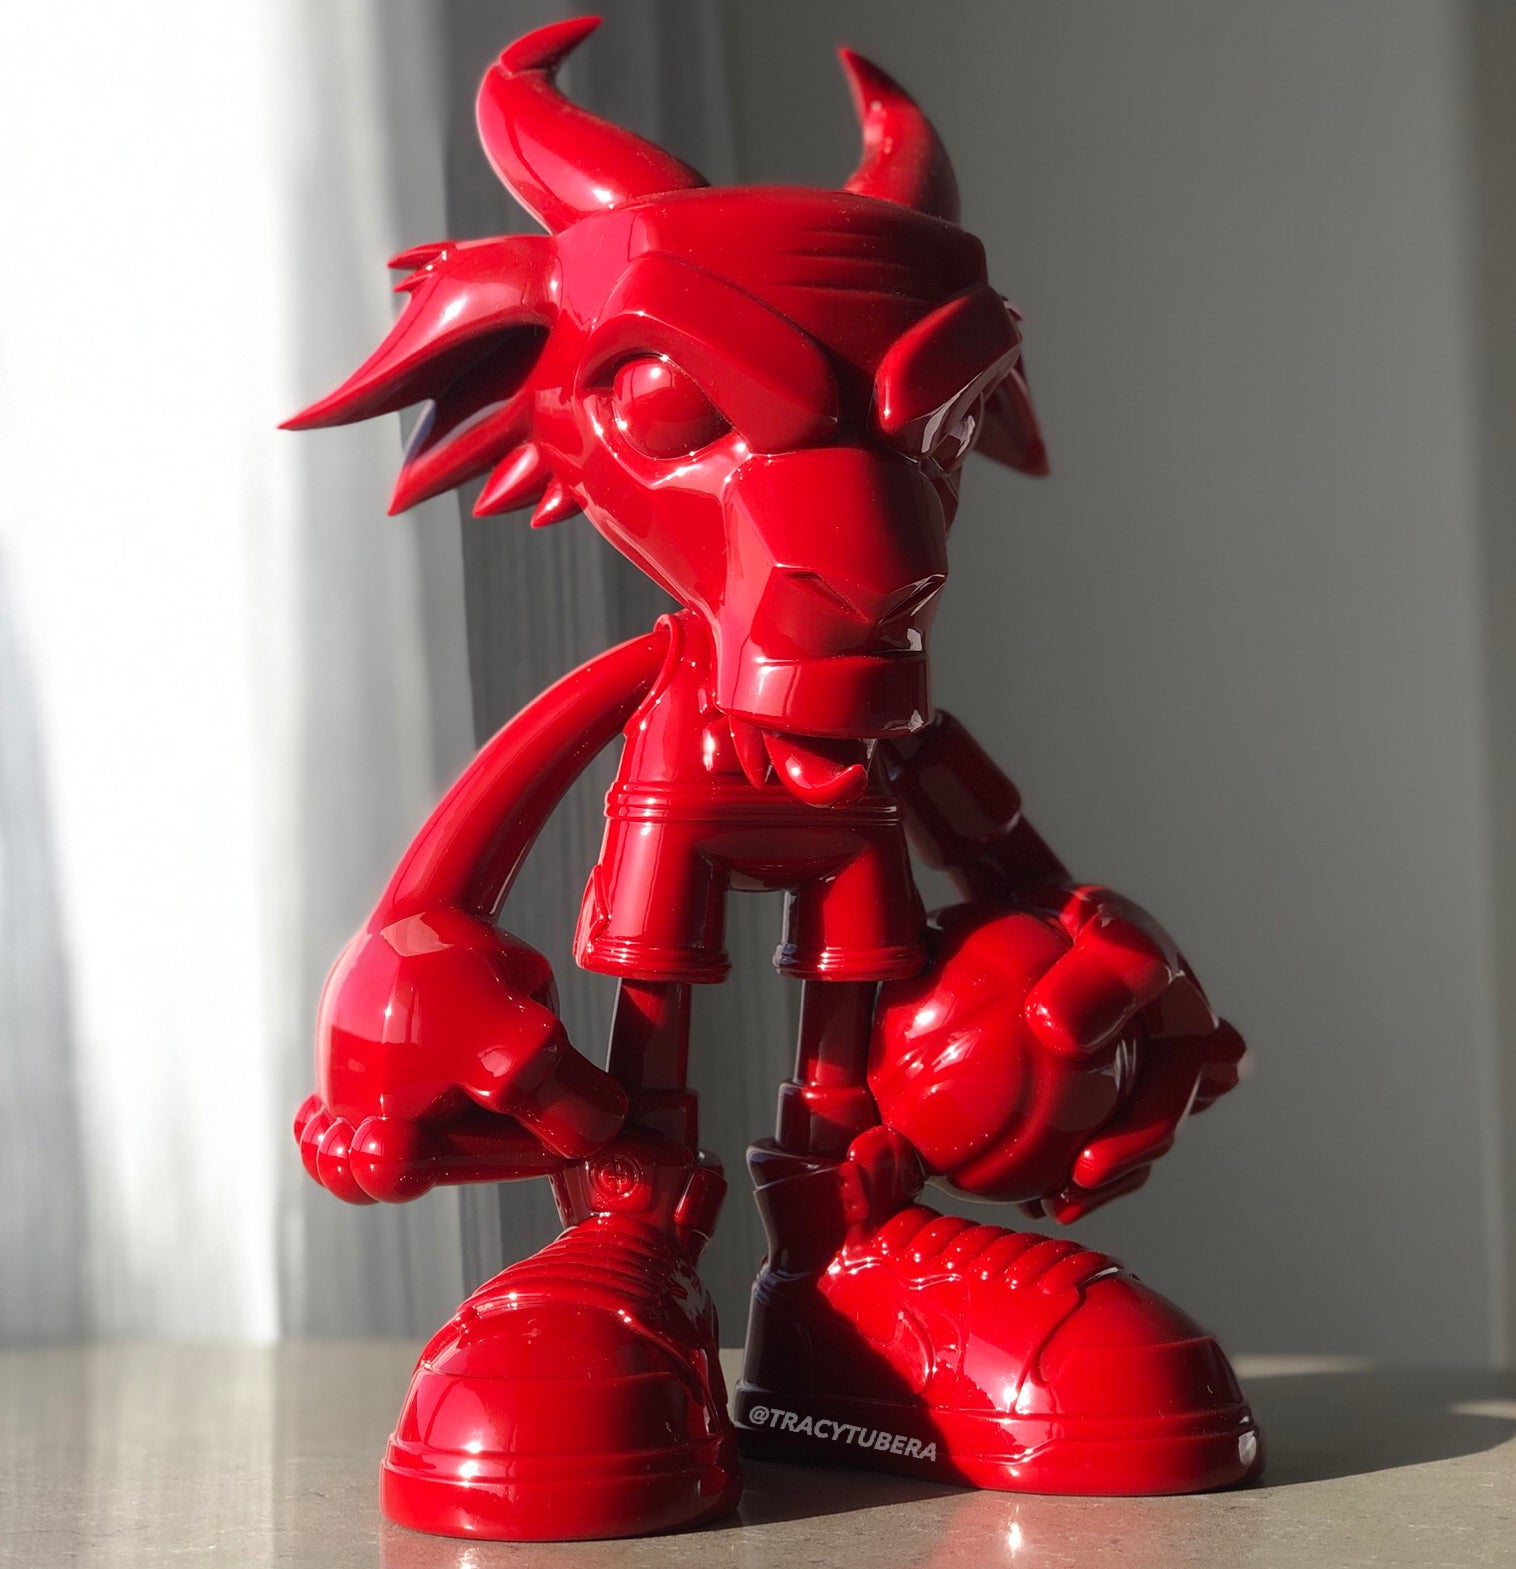 The G.O.A.T. Chicago Edition resin art toy by Tracy Tubera and Mana Studios